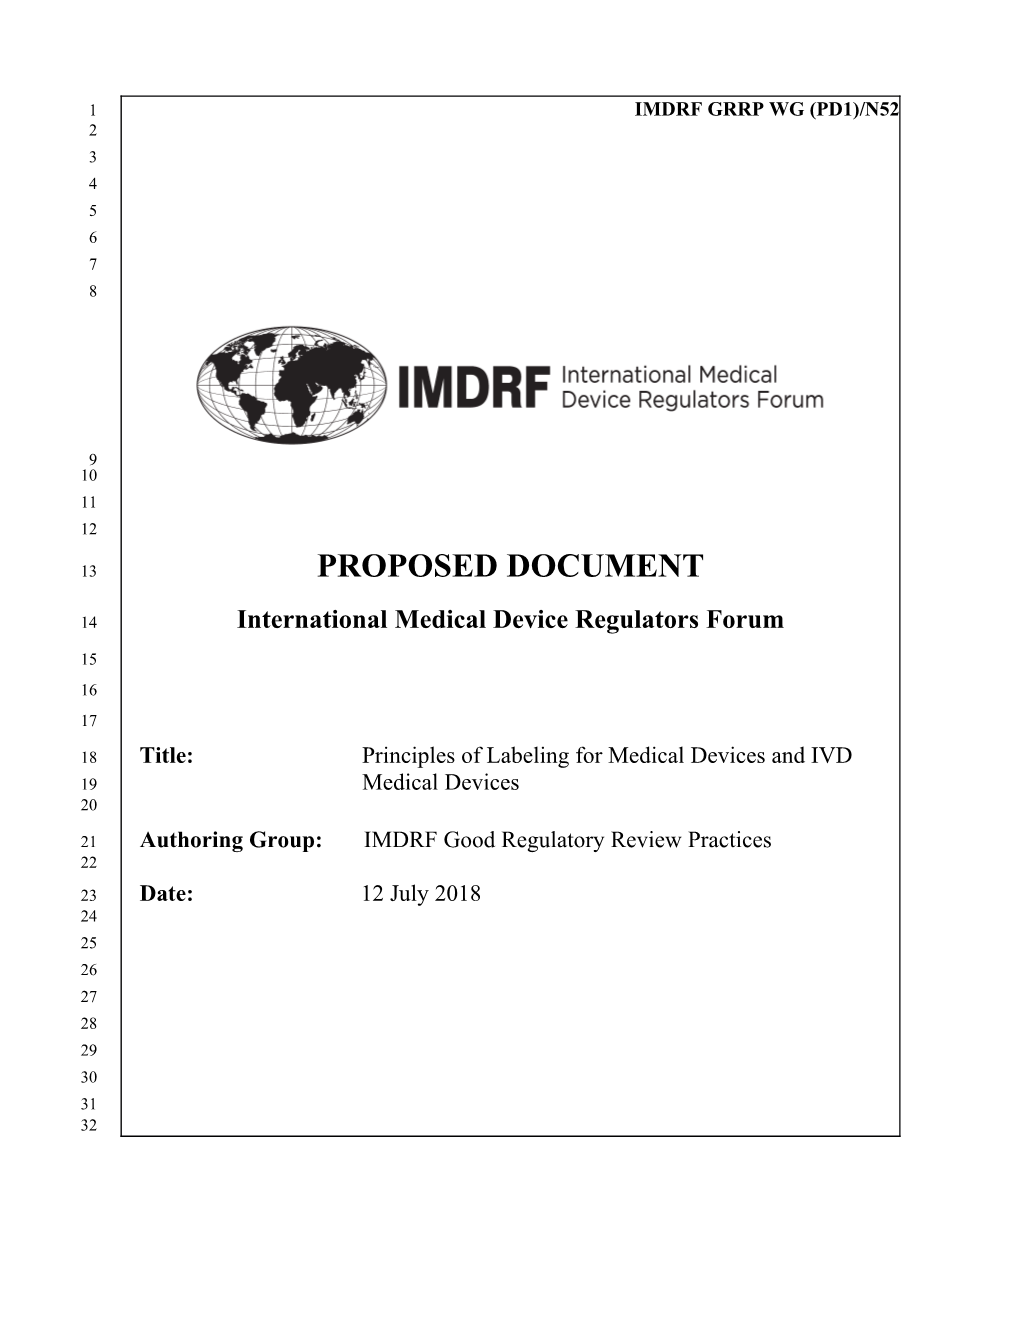 Proposed Document: Principles of Labeling for Medical Devices and IVD Medical Devices